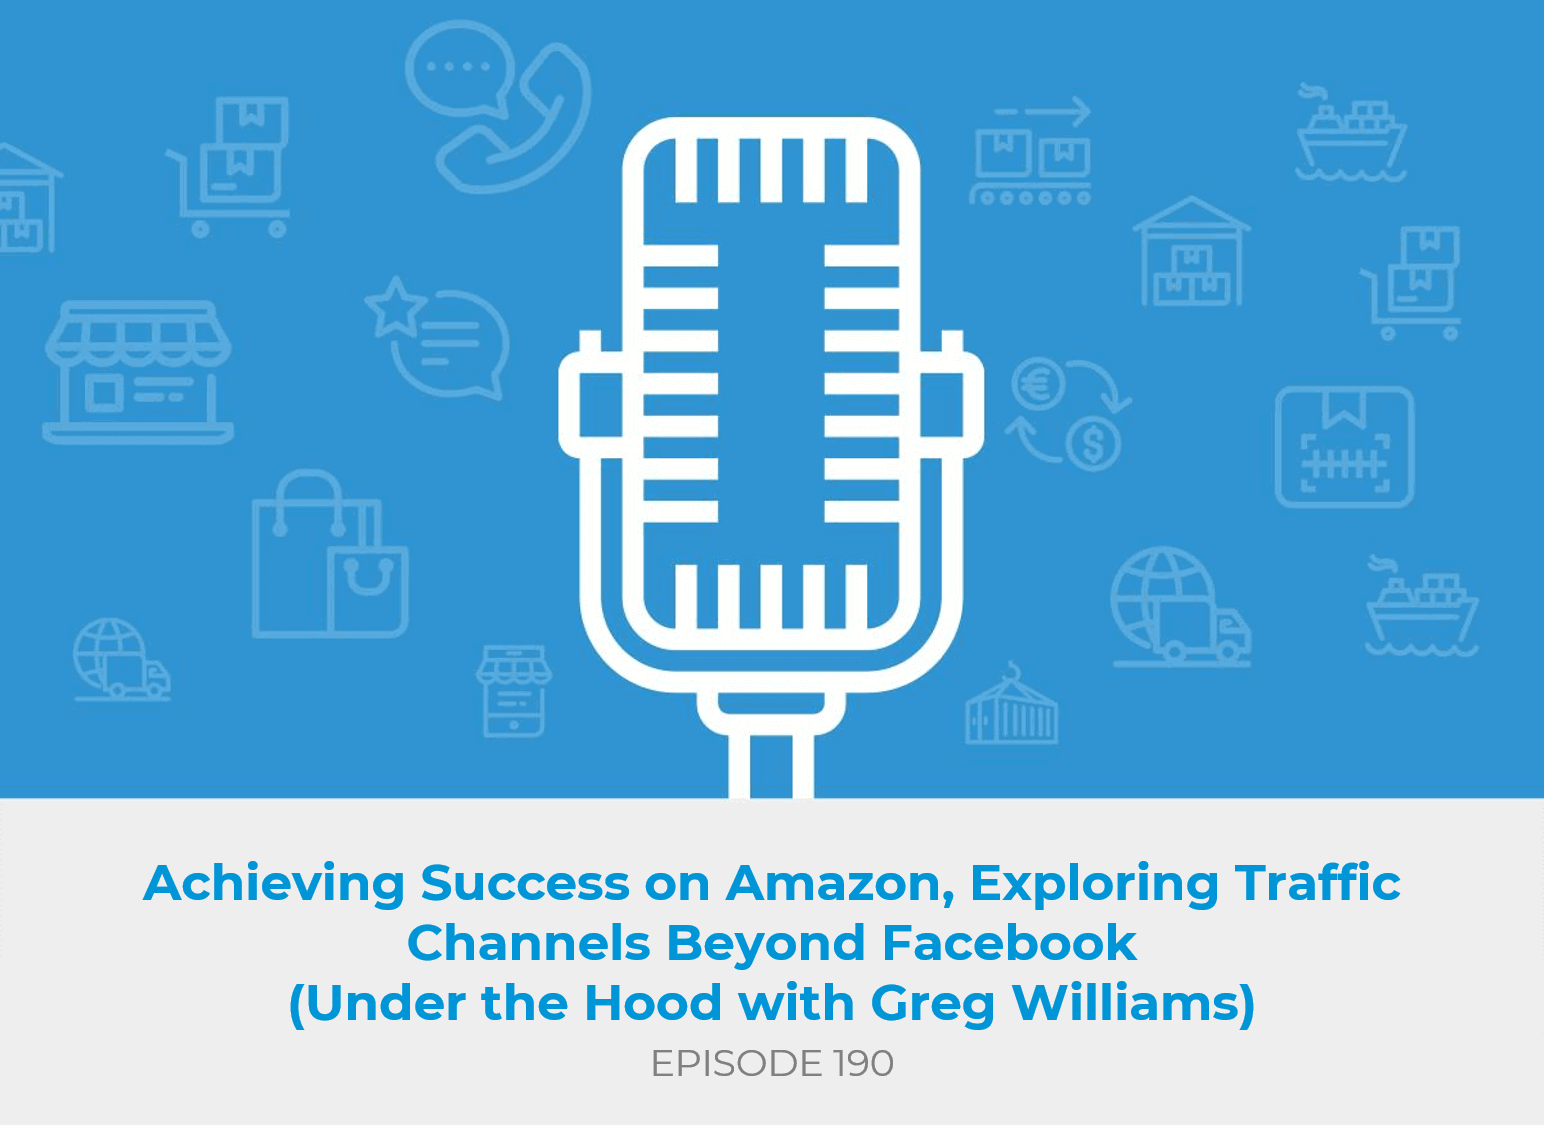 Achieving Success on Amazon,Exploring Traffic Channels Beyond Facebook (Under the Hood with Greg Williams)